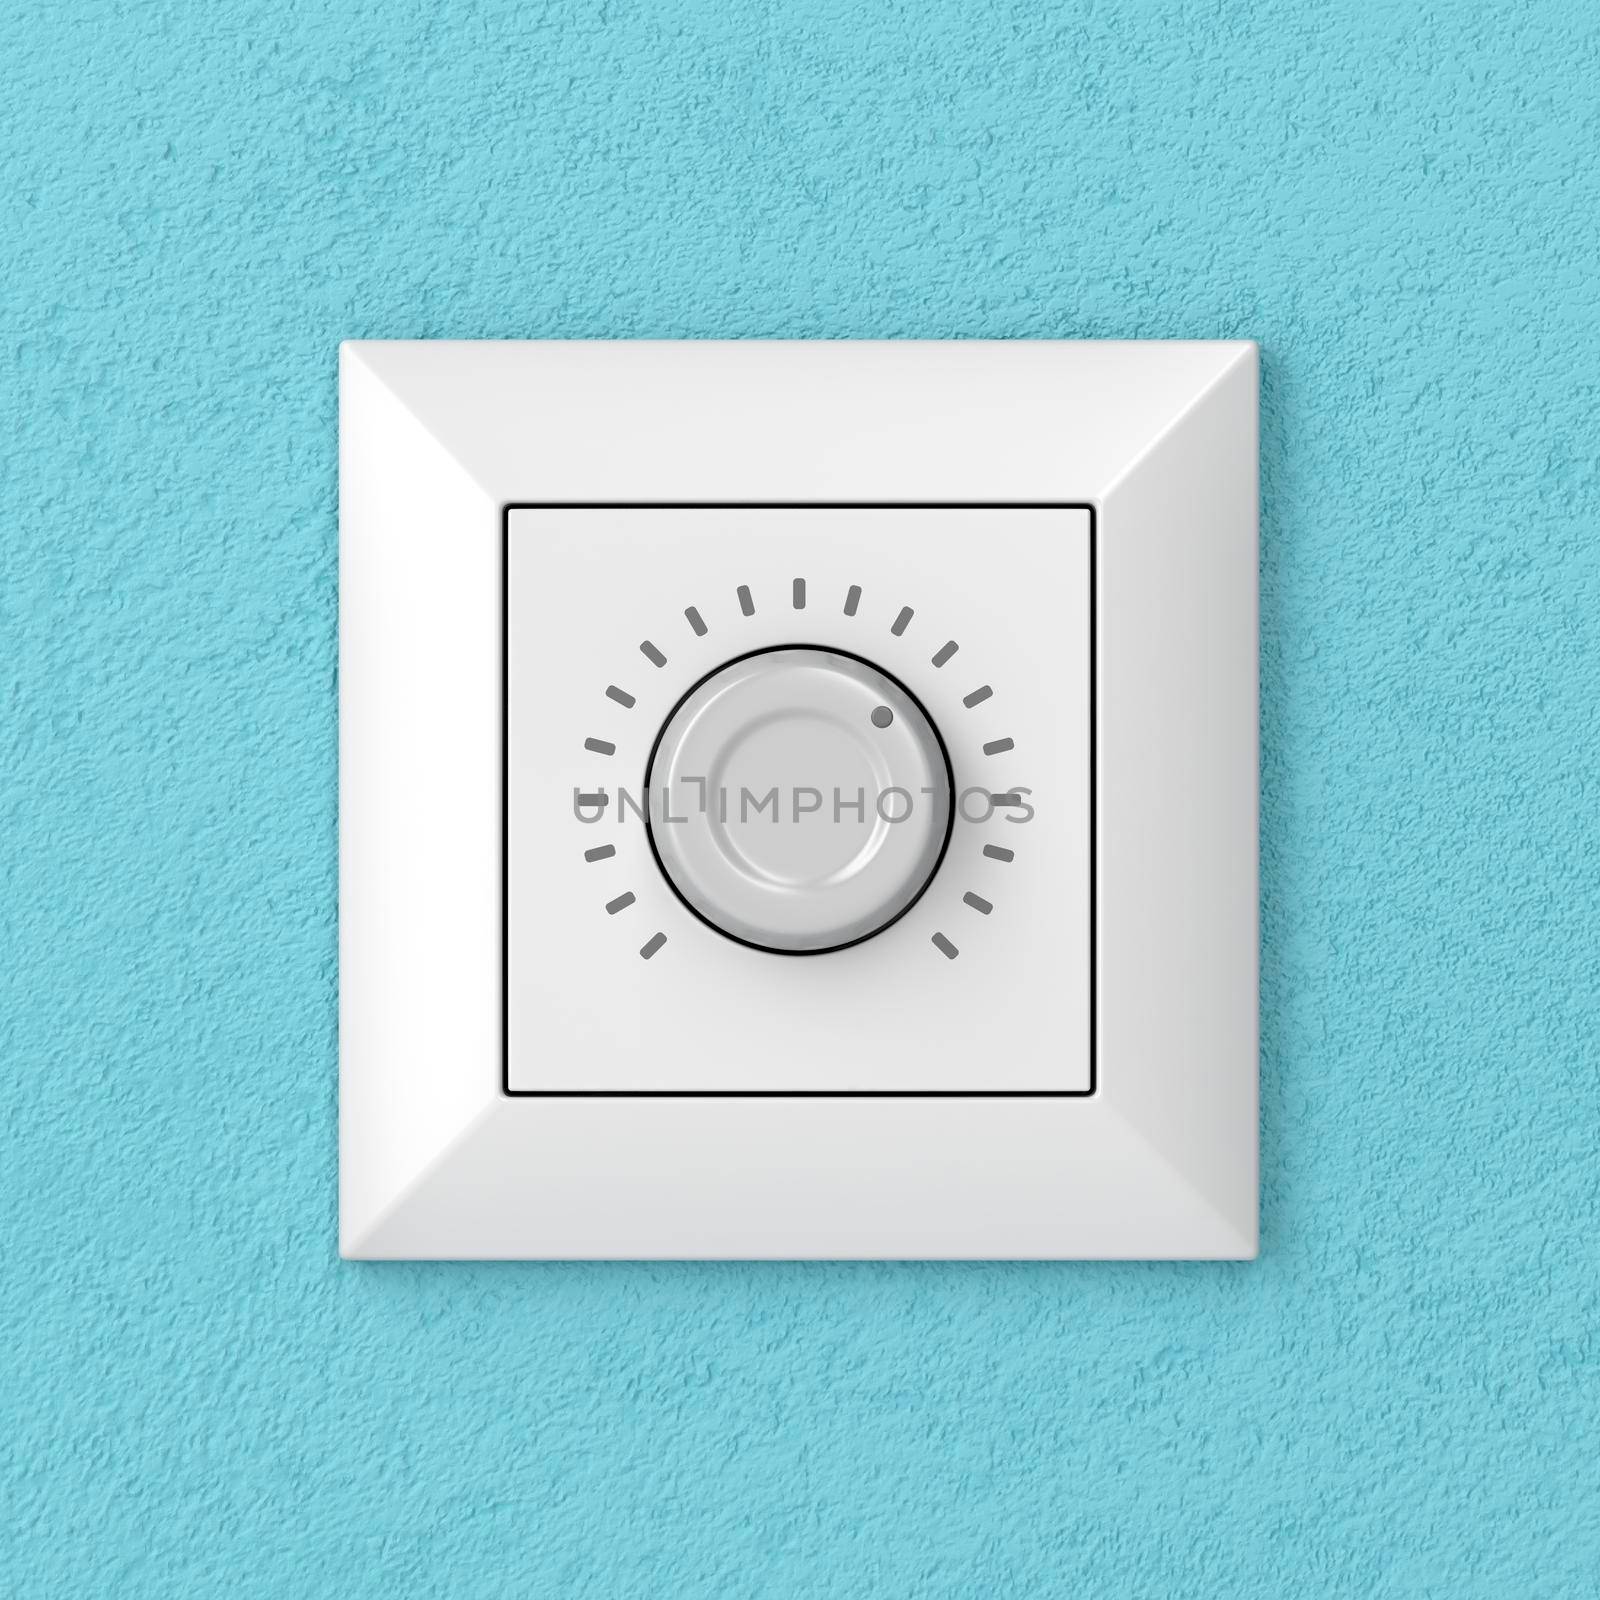 Dimmer light switch by magraphics